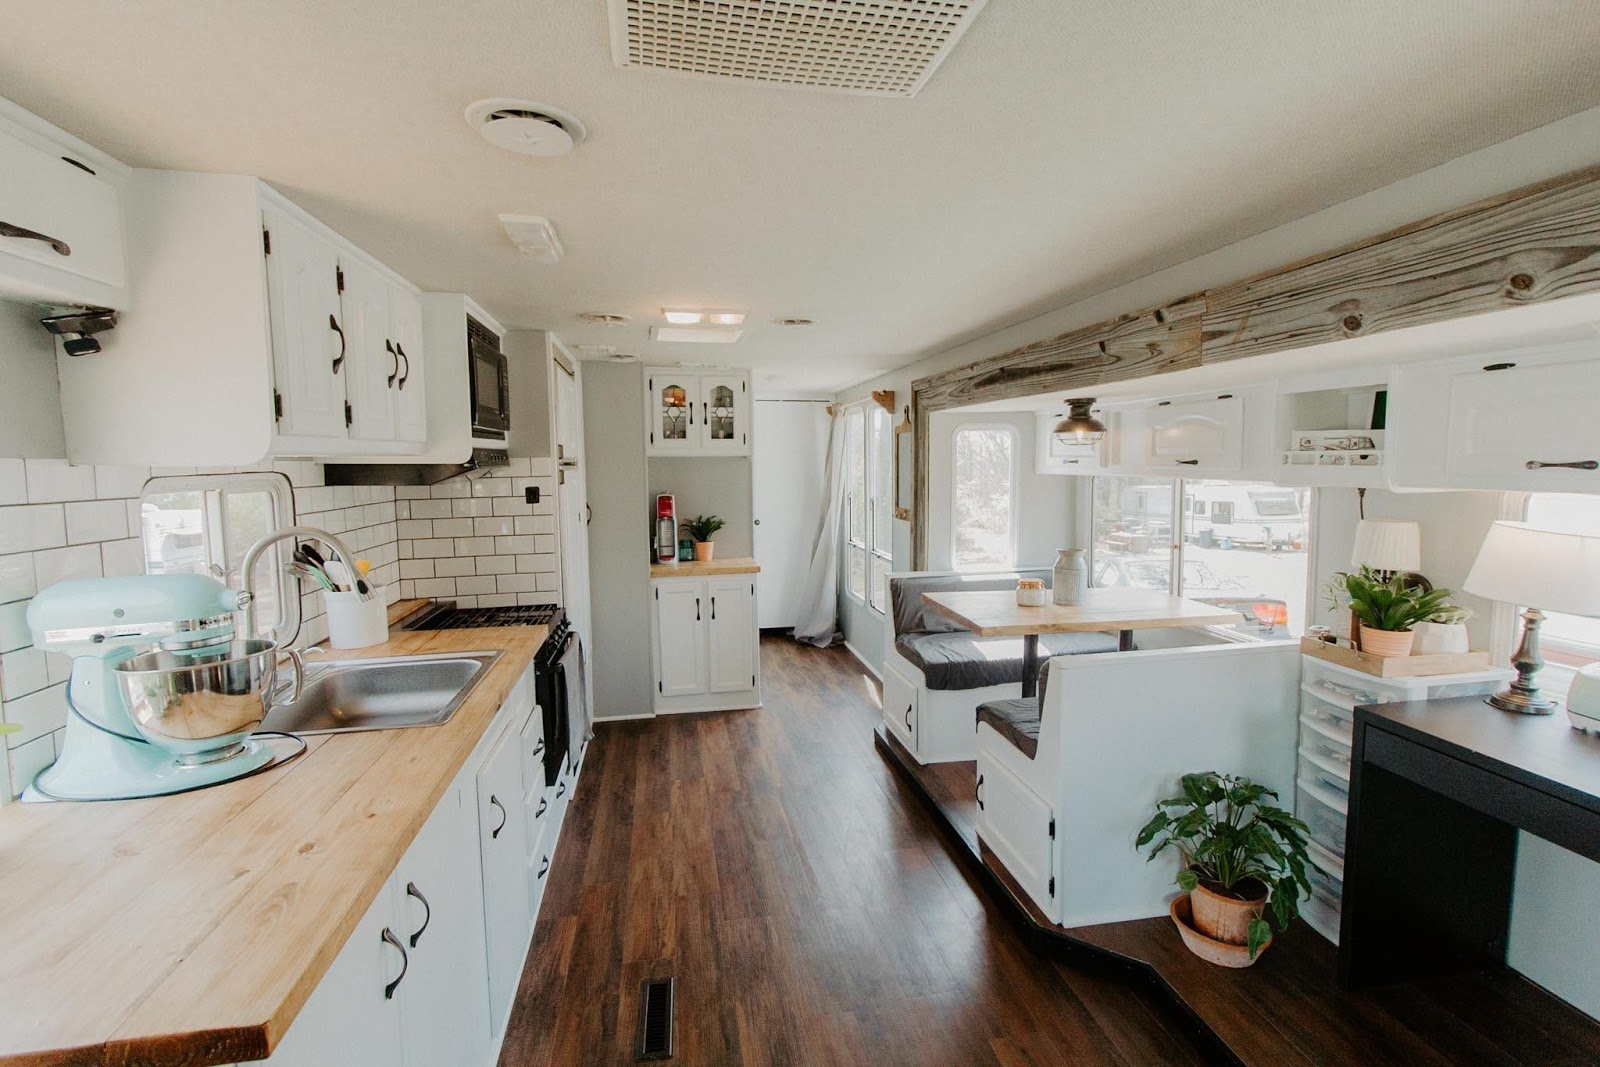 2. Take Inspiration from this budget conscious RV renovation. by simphome.com